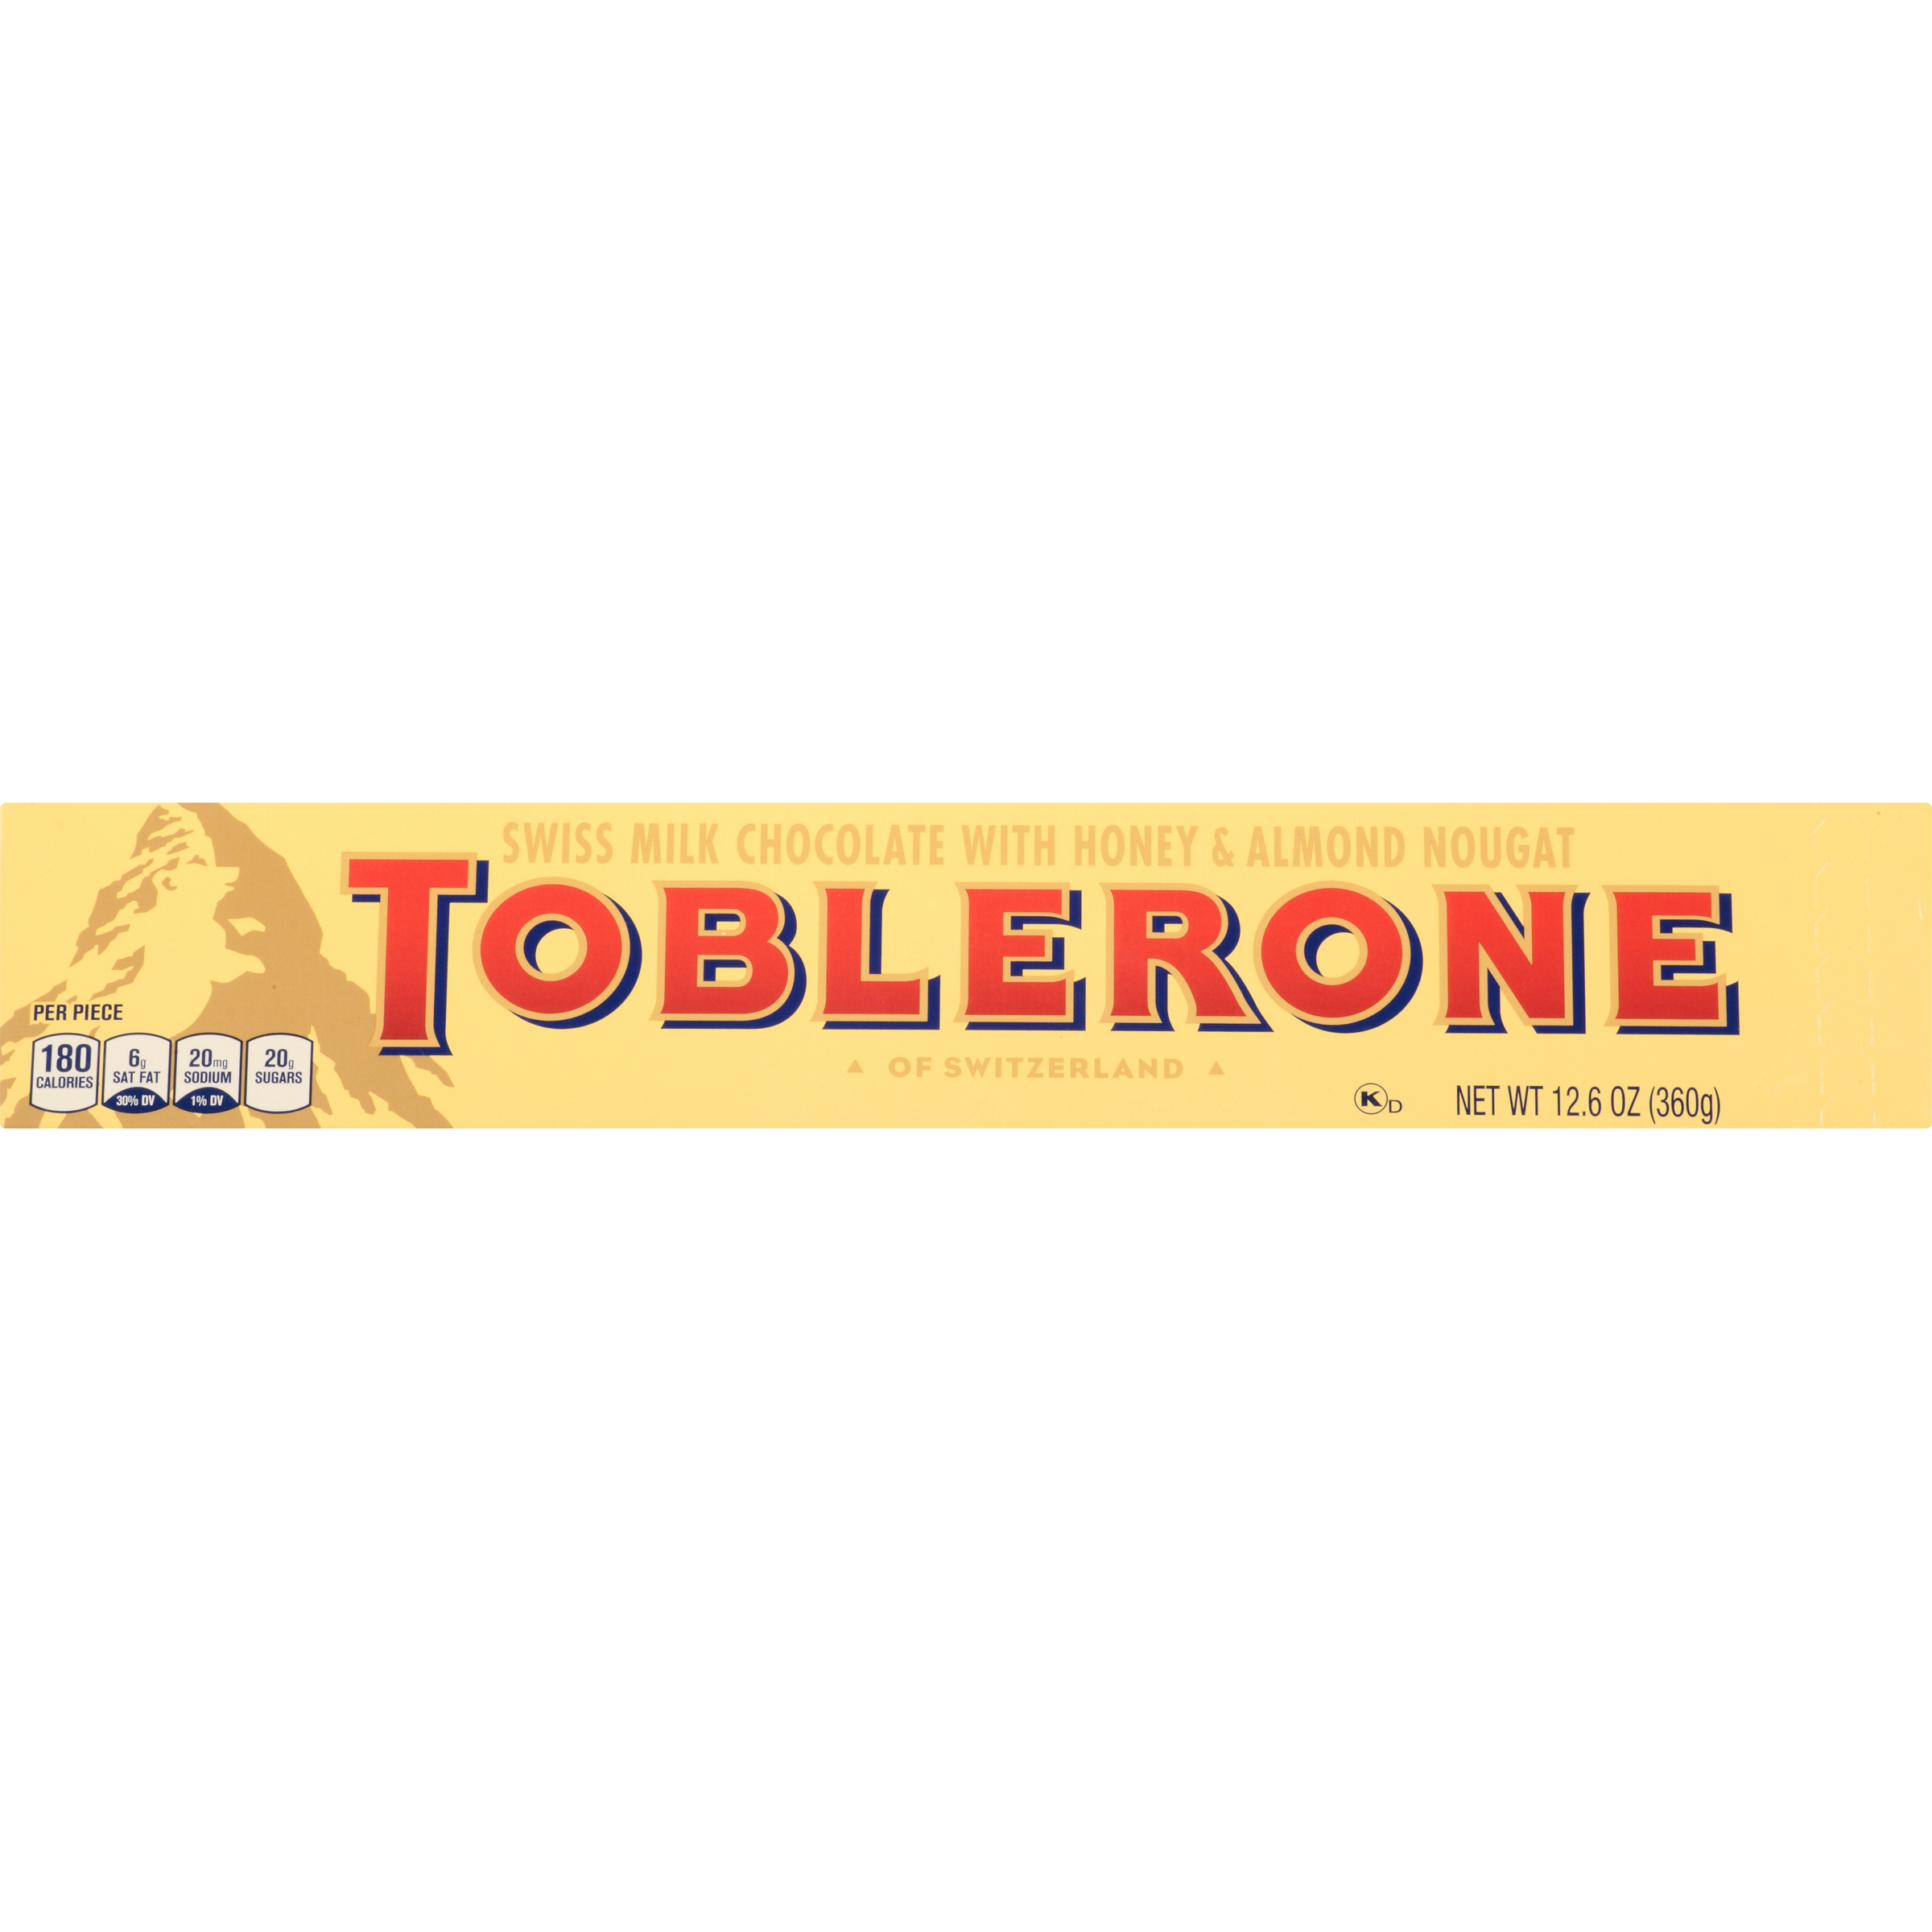 Toblerone Swiss Milk Chocolate Candy Bar with Honey and Almond Nougat, 12.6 oz-3